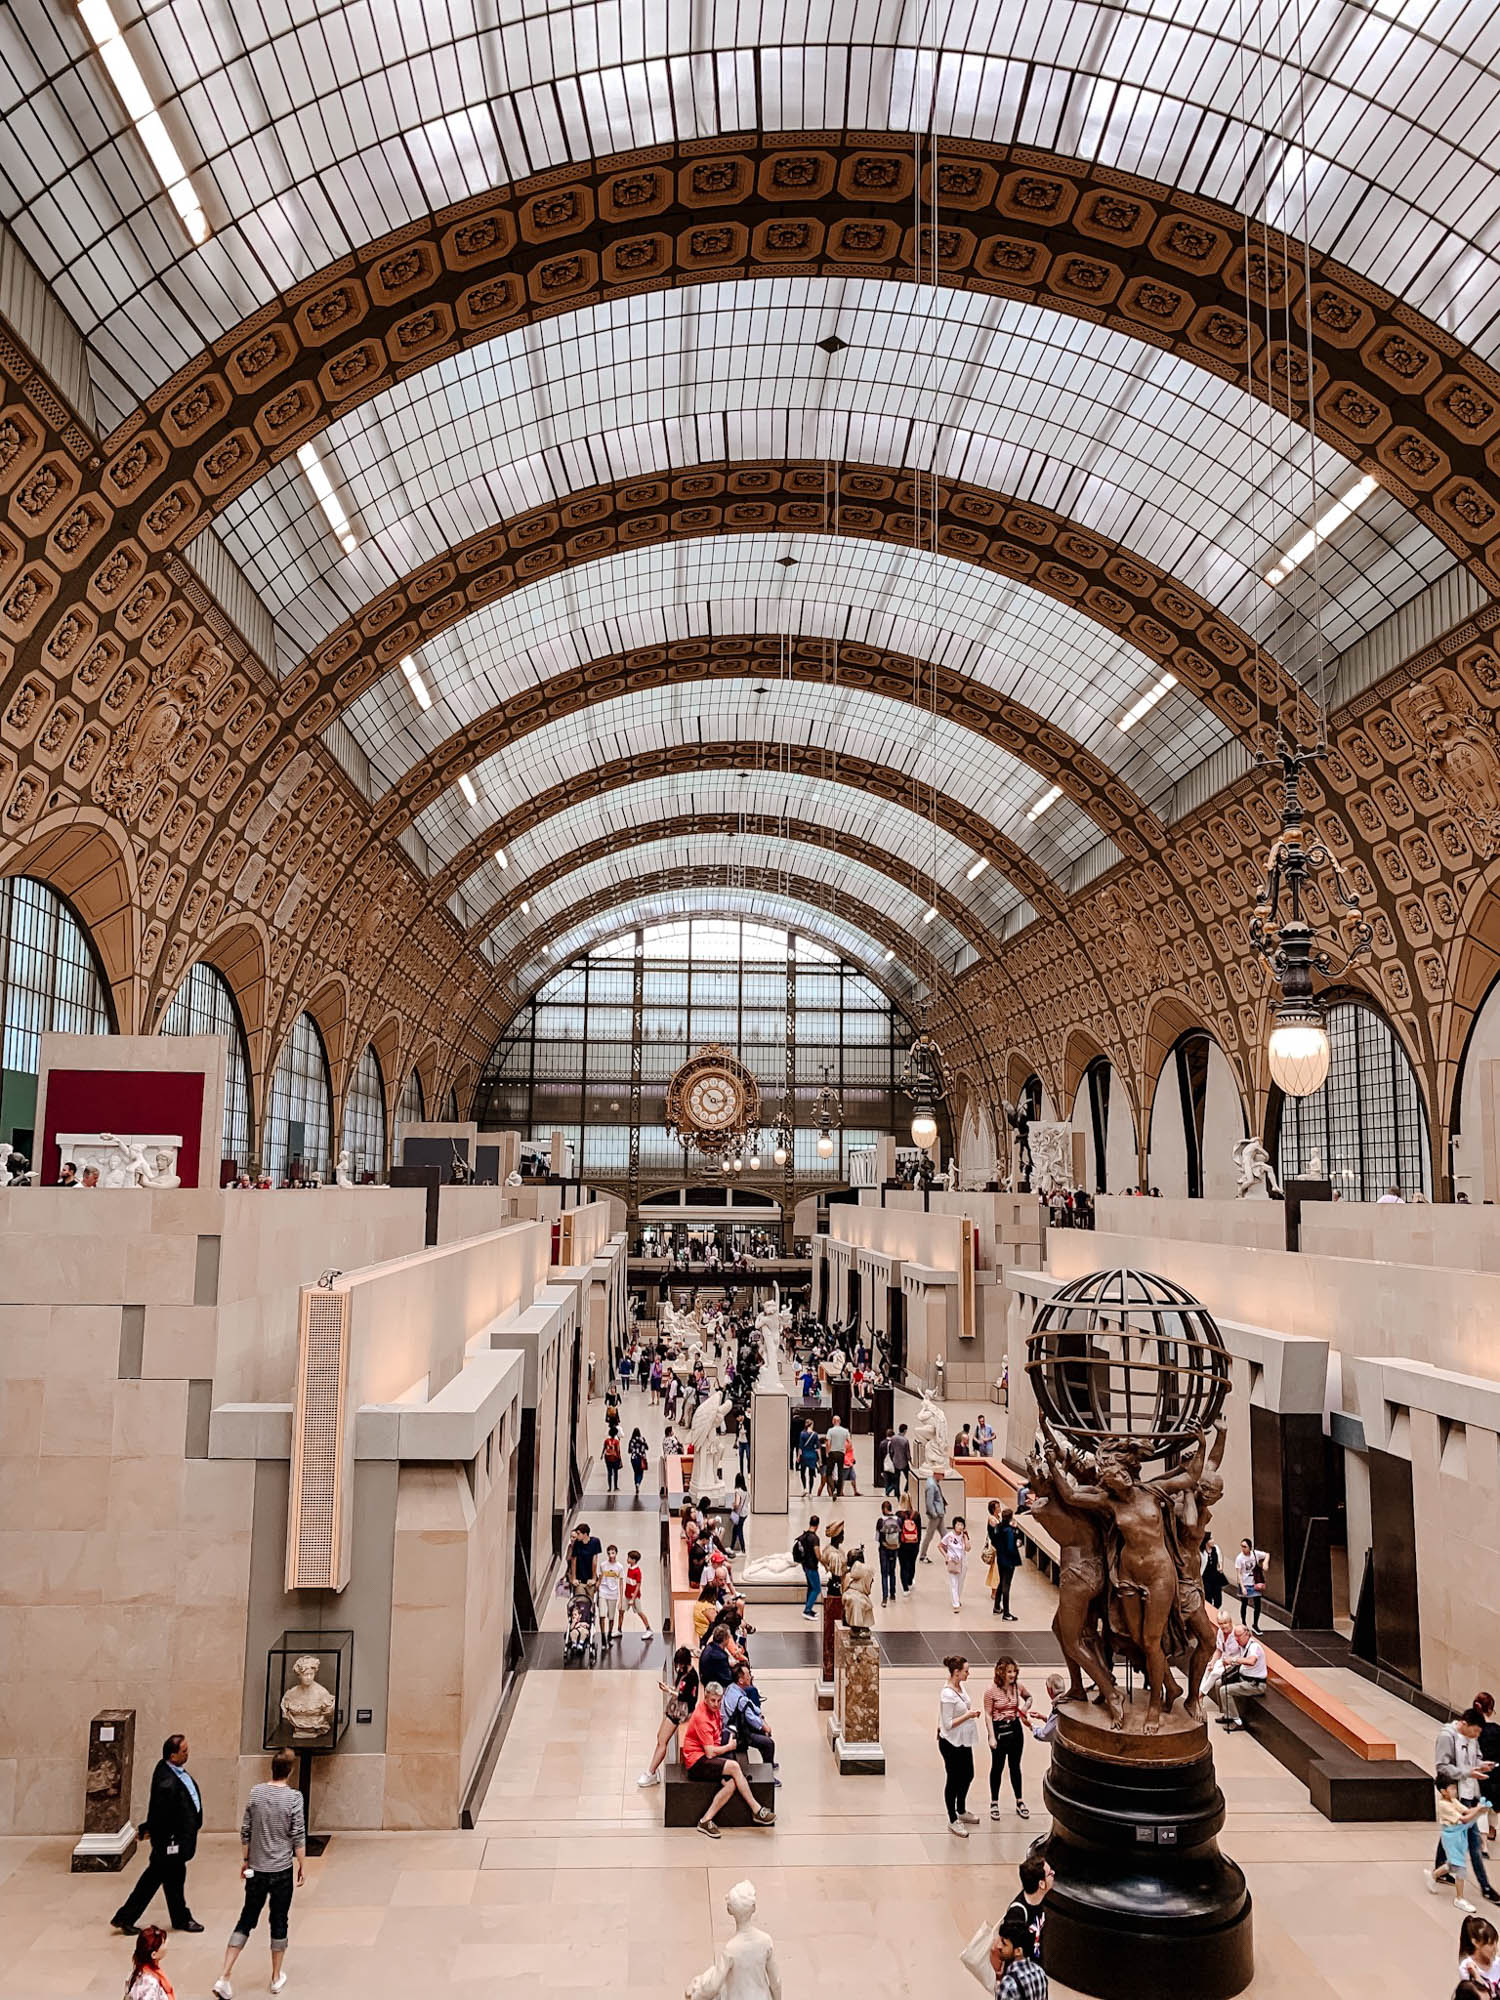 Day trip to the Paris museums